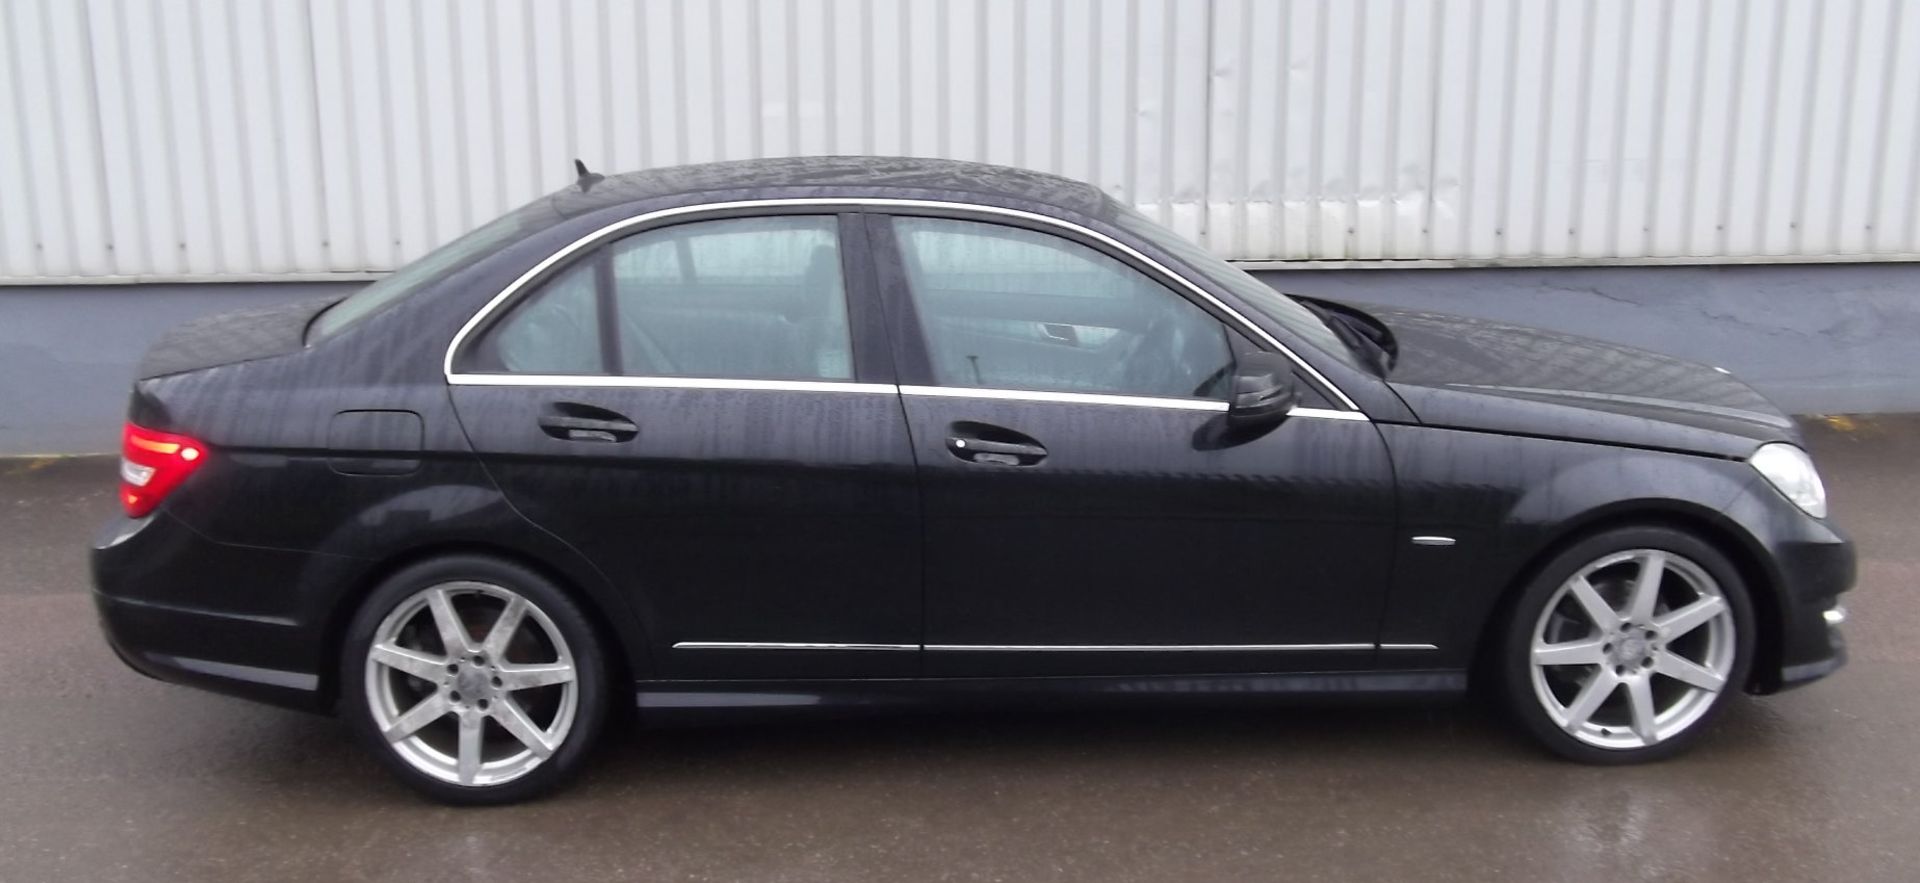 2011 Mercedes C220 CDI BlueEFFICIENCY Sport Edition 125 4dr Auto Saloon - CL505 - NO VAT ON THE HAMM - Image 9 of 21